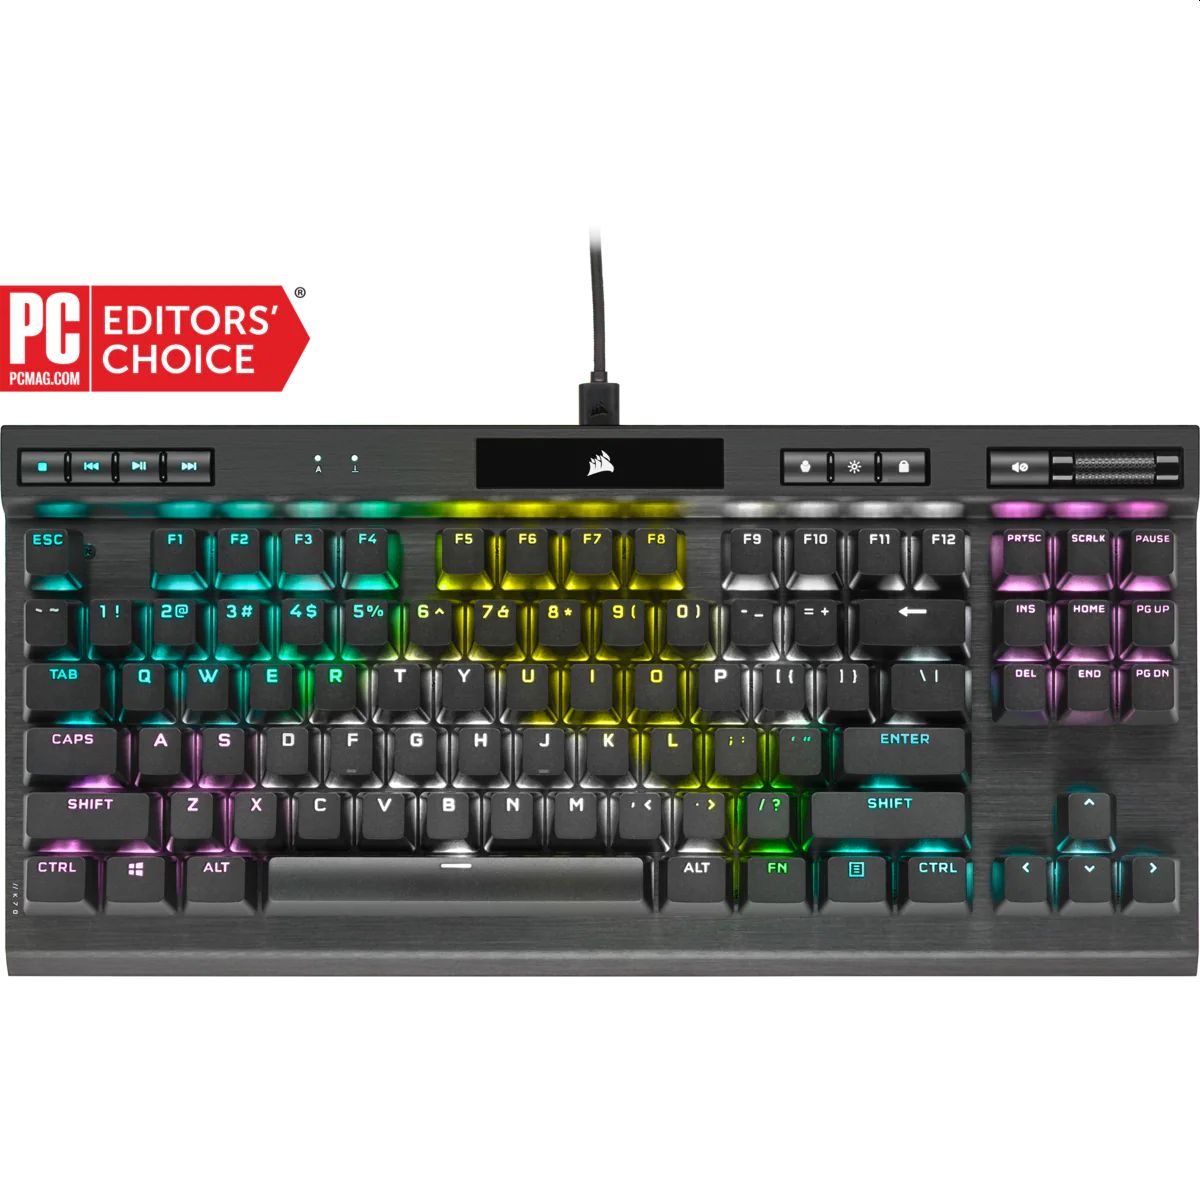 Corsair Online Store - GET FAR CRY 6 FREE When Purchase a Select Gaming Keyboard or Lighting LT100 Tower